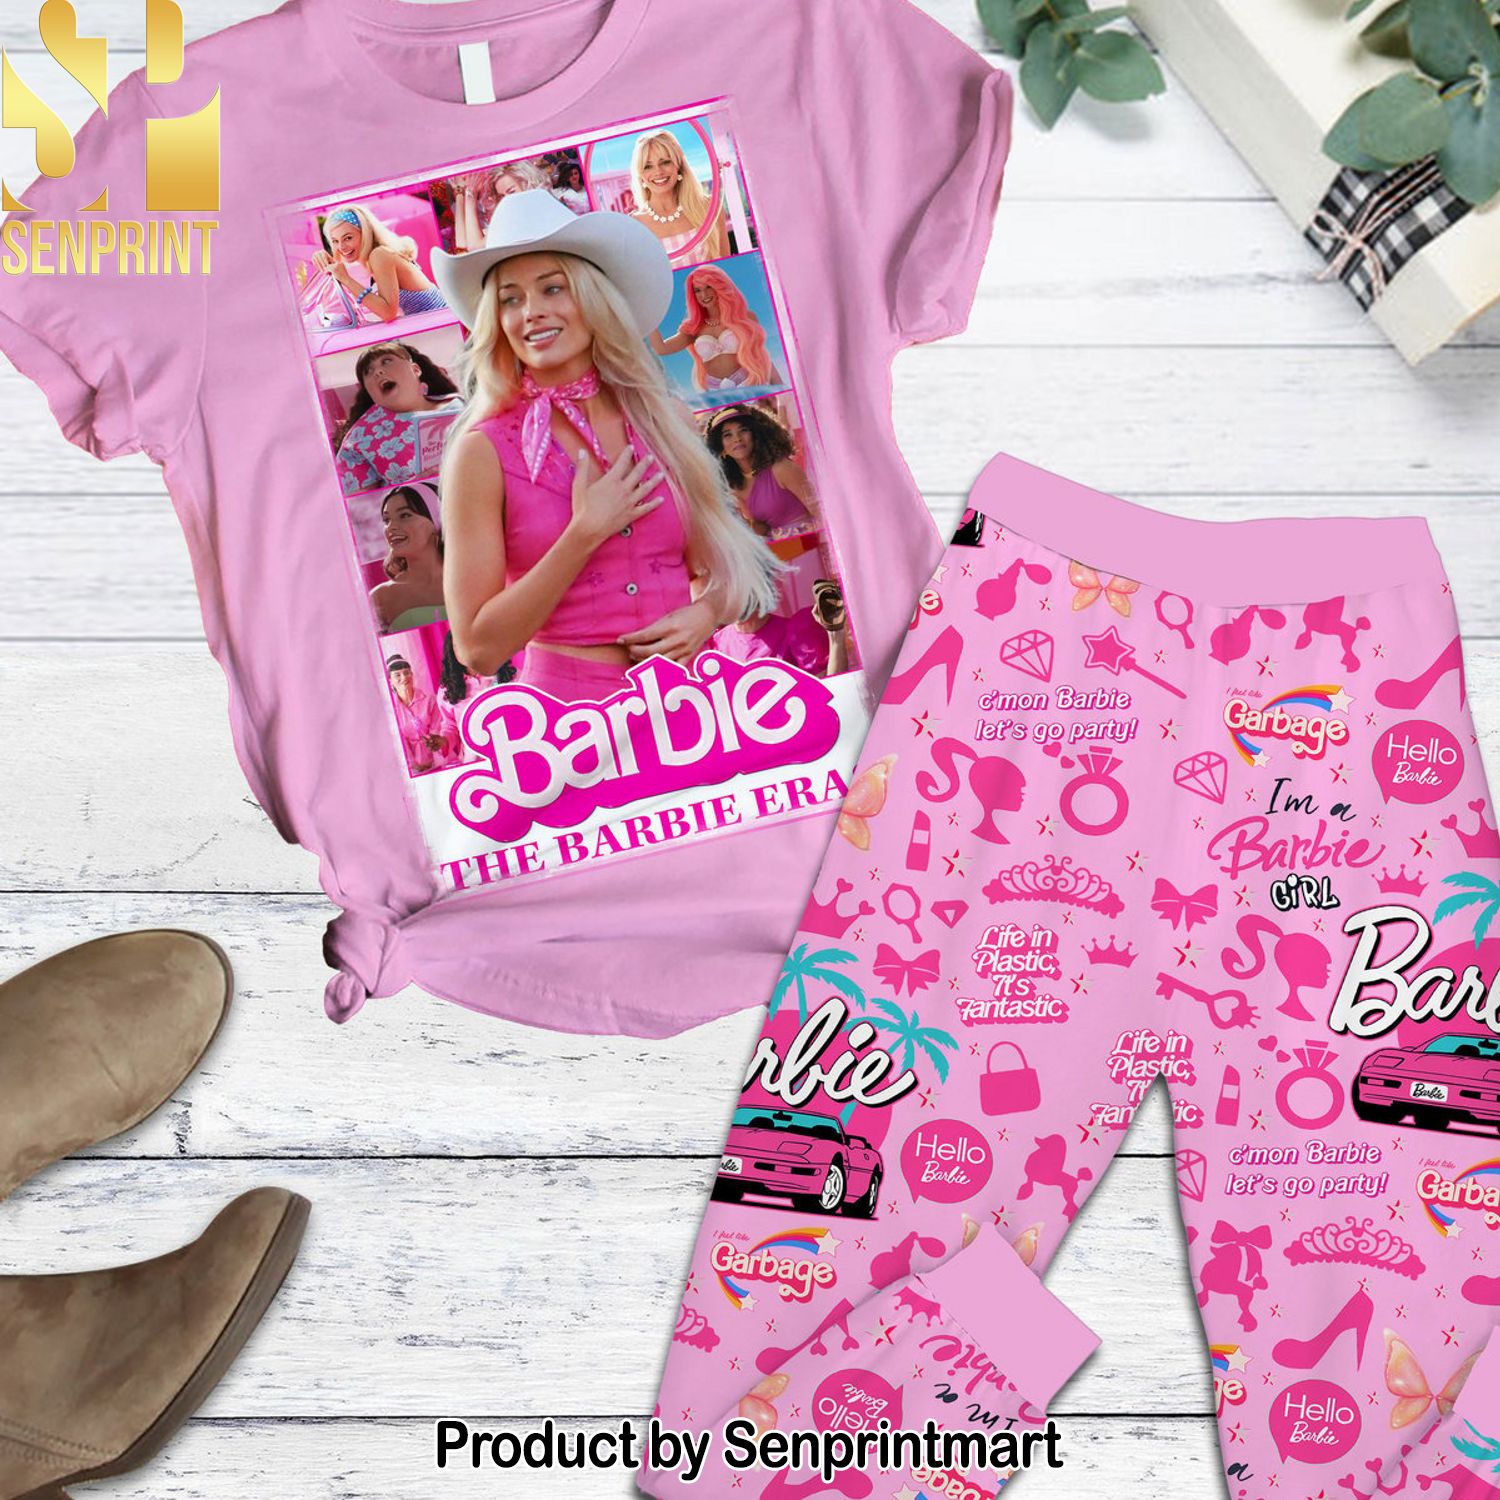 Barbie Movie New Outfit Full Printed Pajama Sets